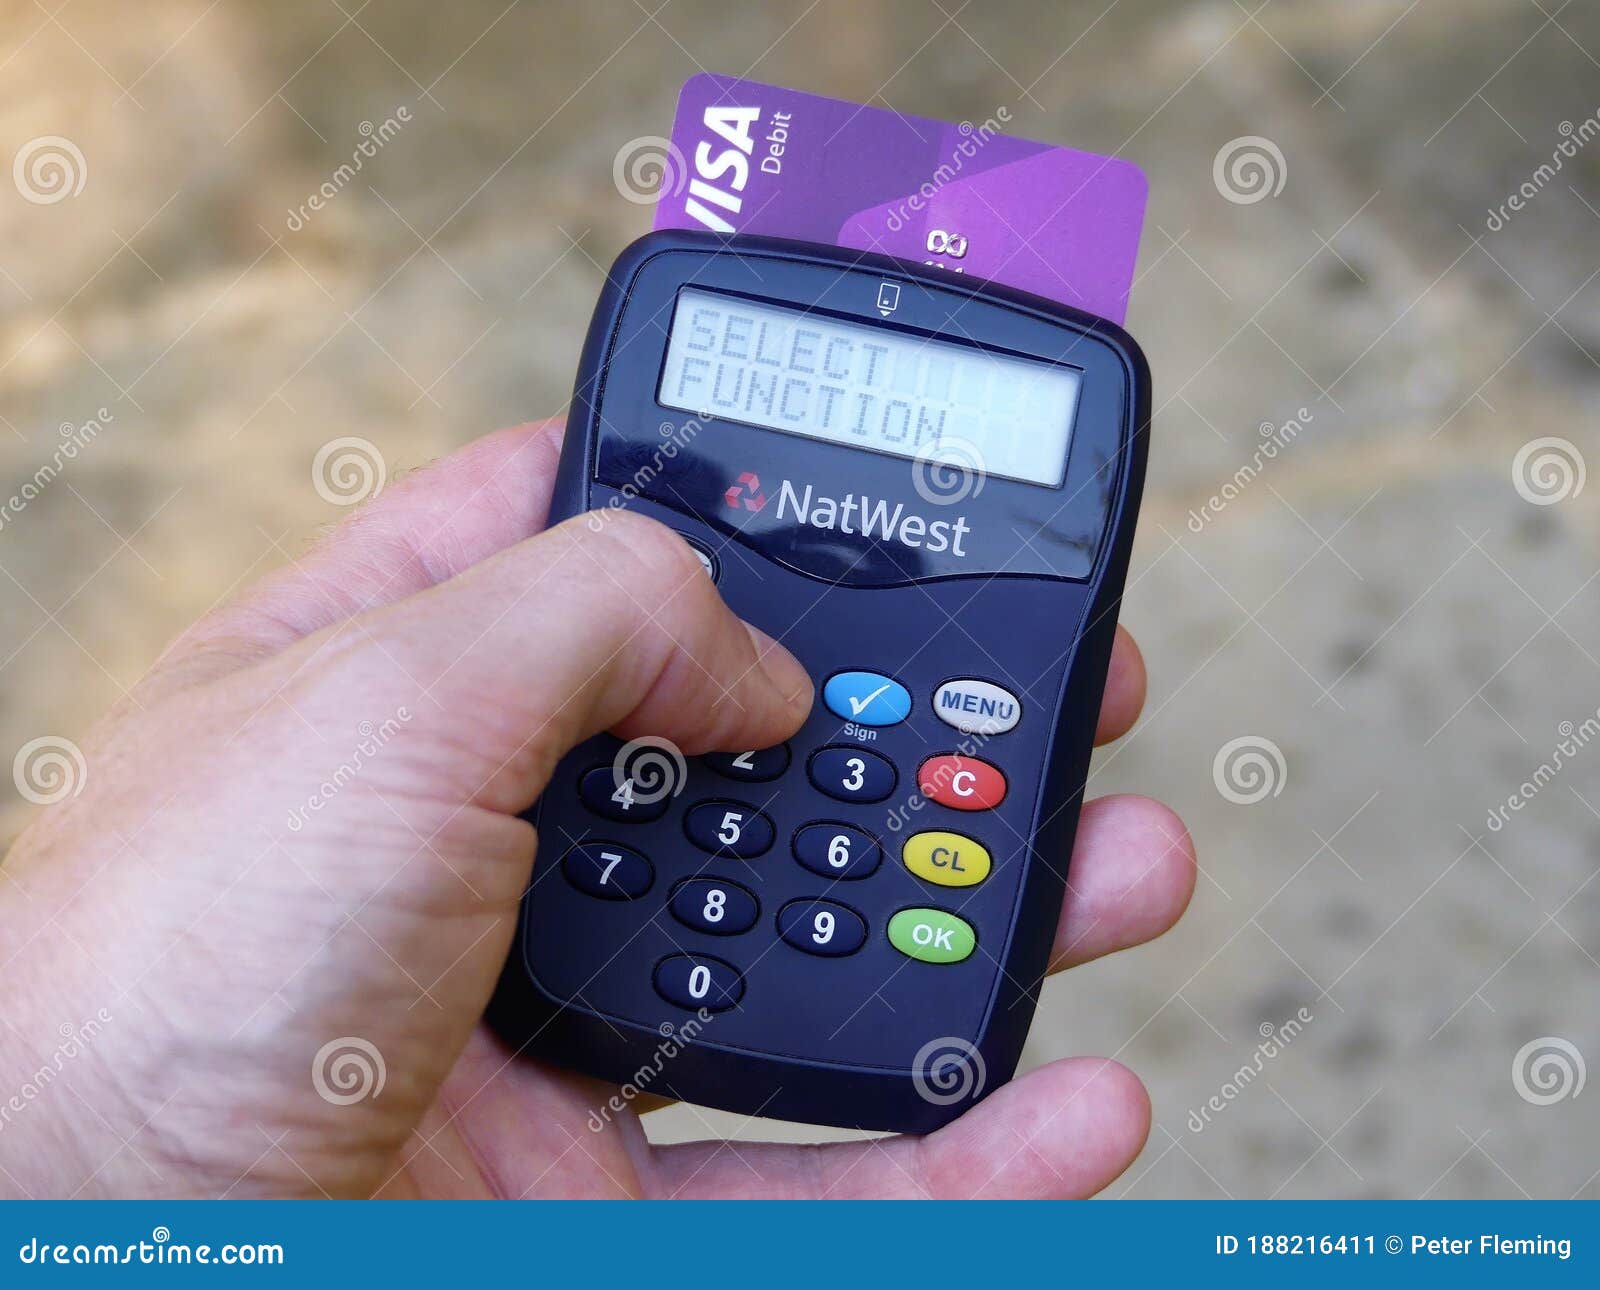 NatWest Card Reader, an Online Banking Security Device Providing